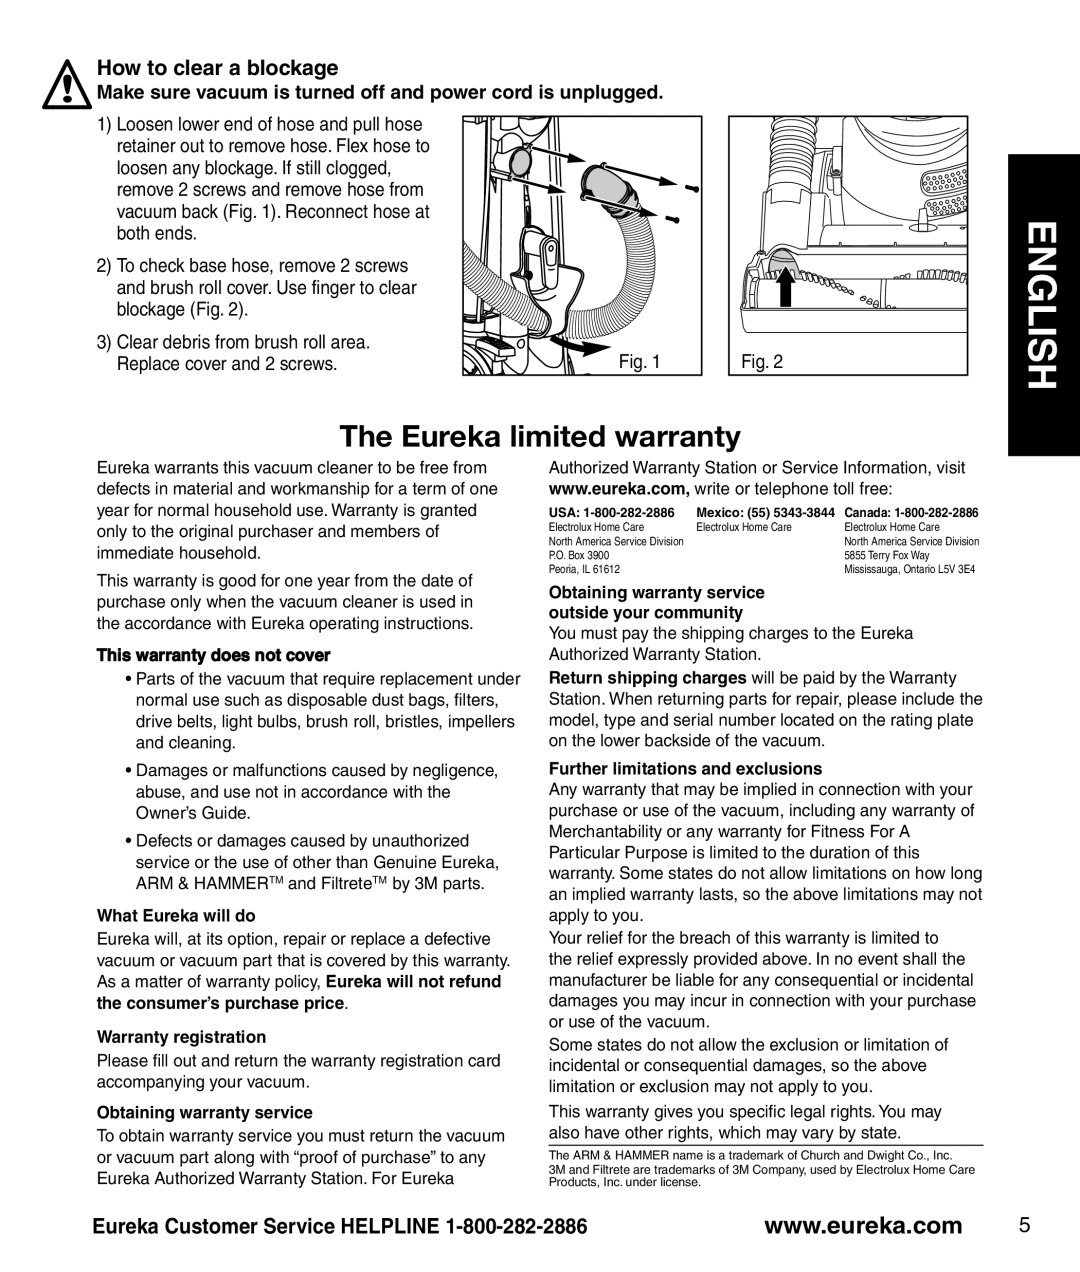 Eureka 4770 manual How to clear a blockage, Make sure vacuum is turned off and power cord is unplugged, English 